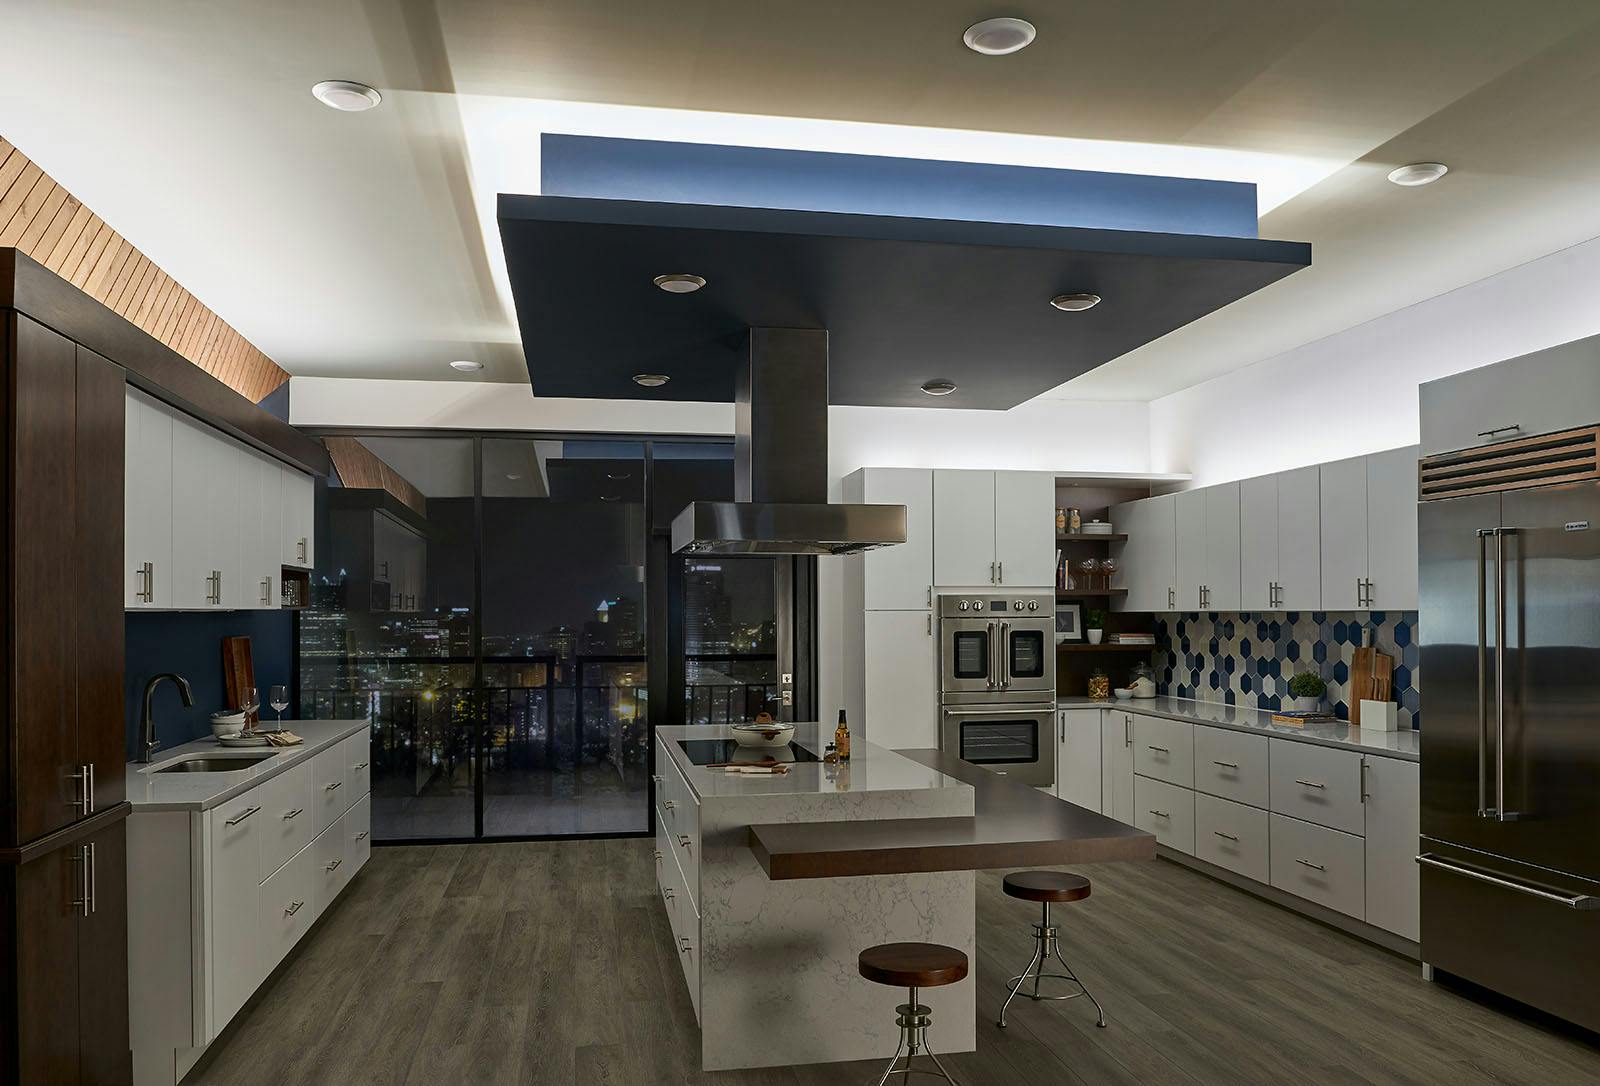 Modern white kitchen with blue, wood, and stainless steel accents in an urban setting with only tape lighting turned on